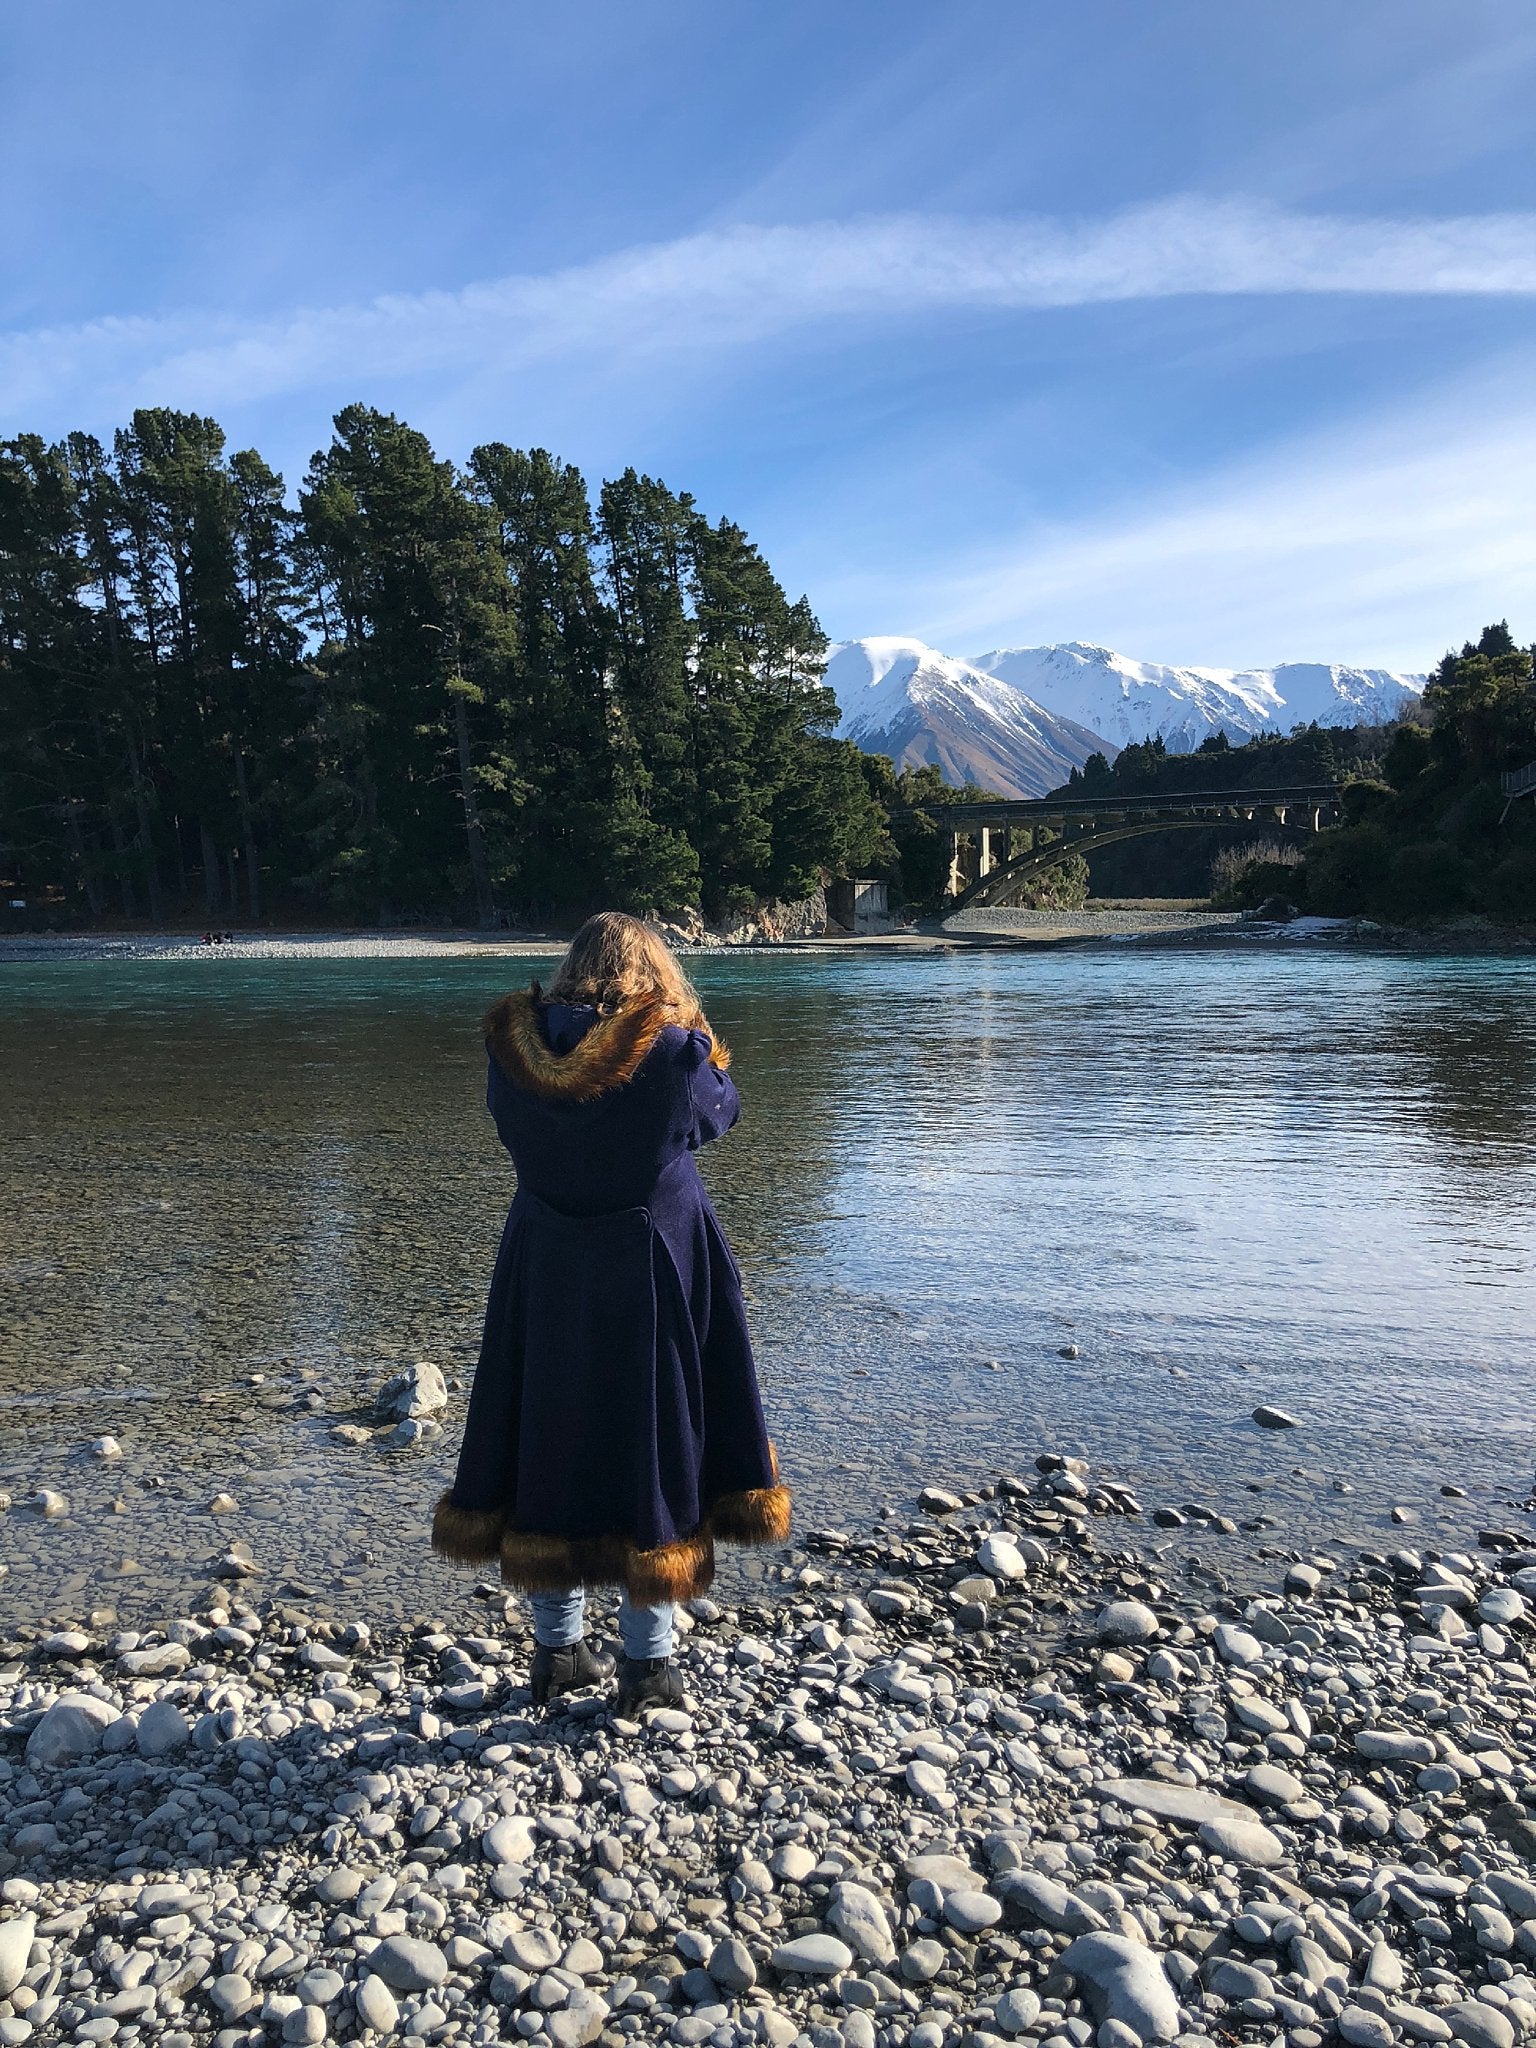 Our romantic weekend away in Christchurch